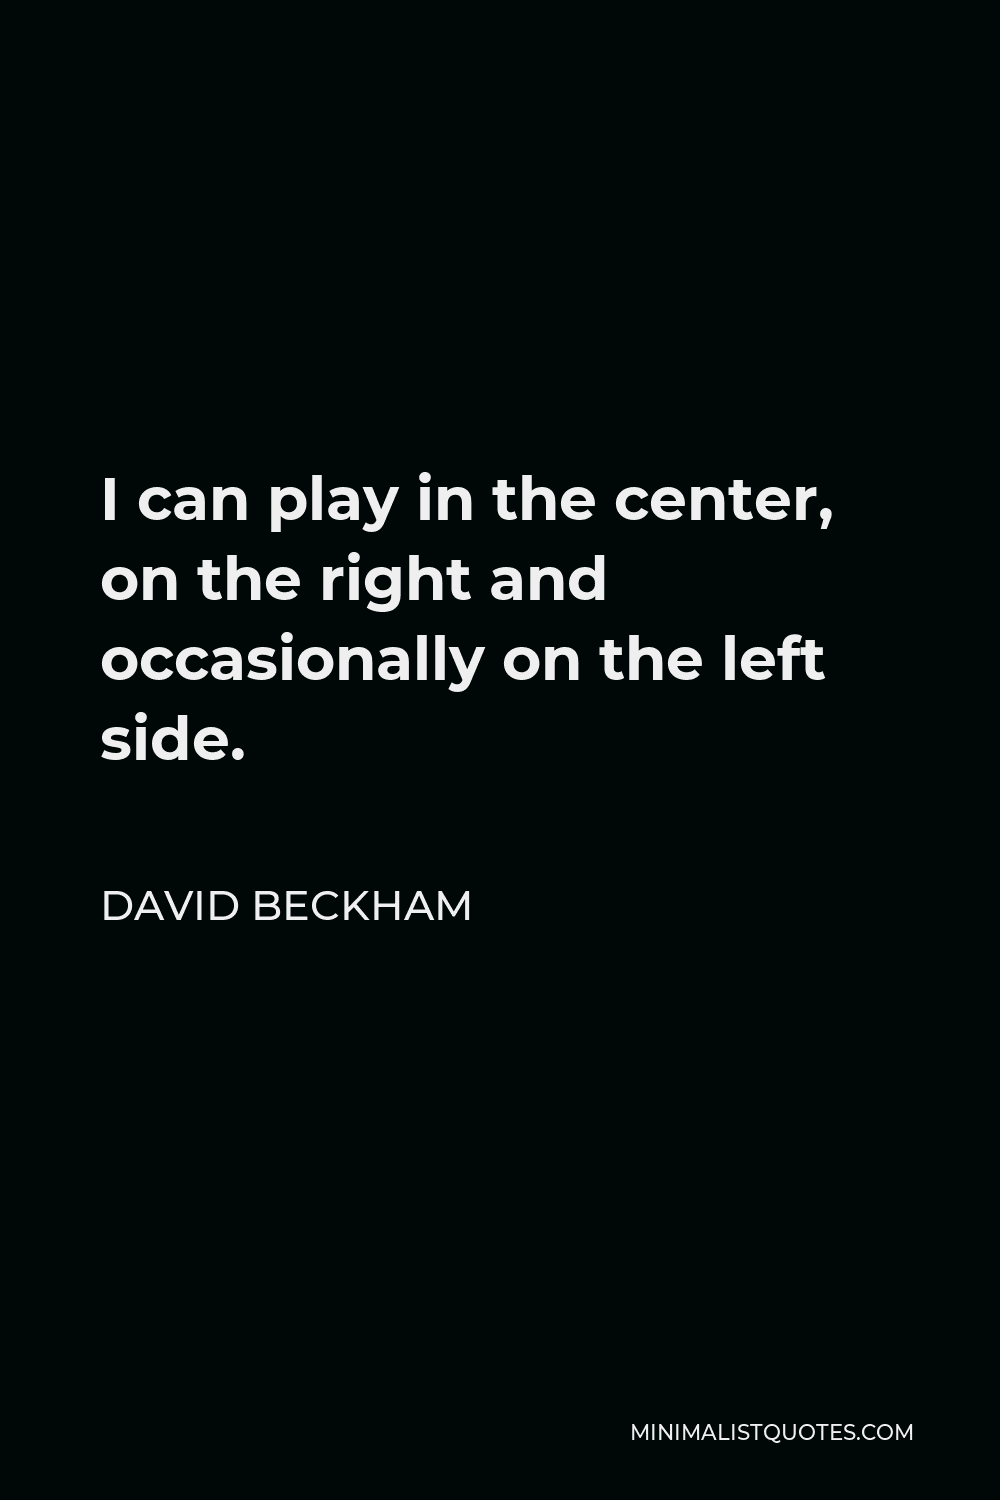 David Beckham Quote - I can play in the center, on the right and occasionally on the left side.